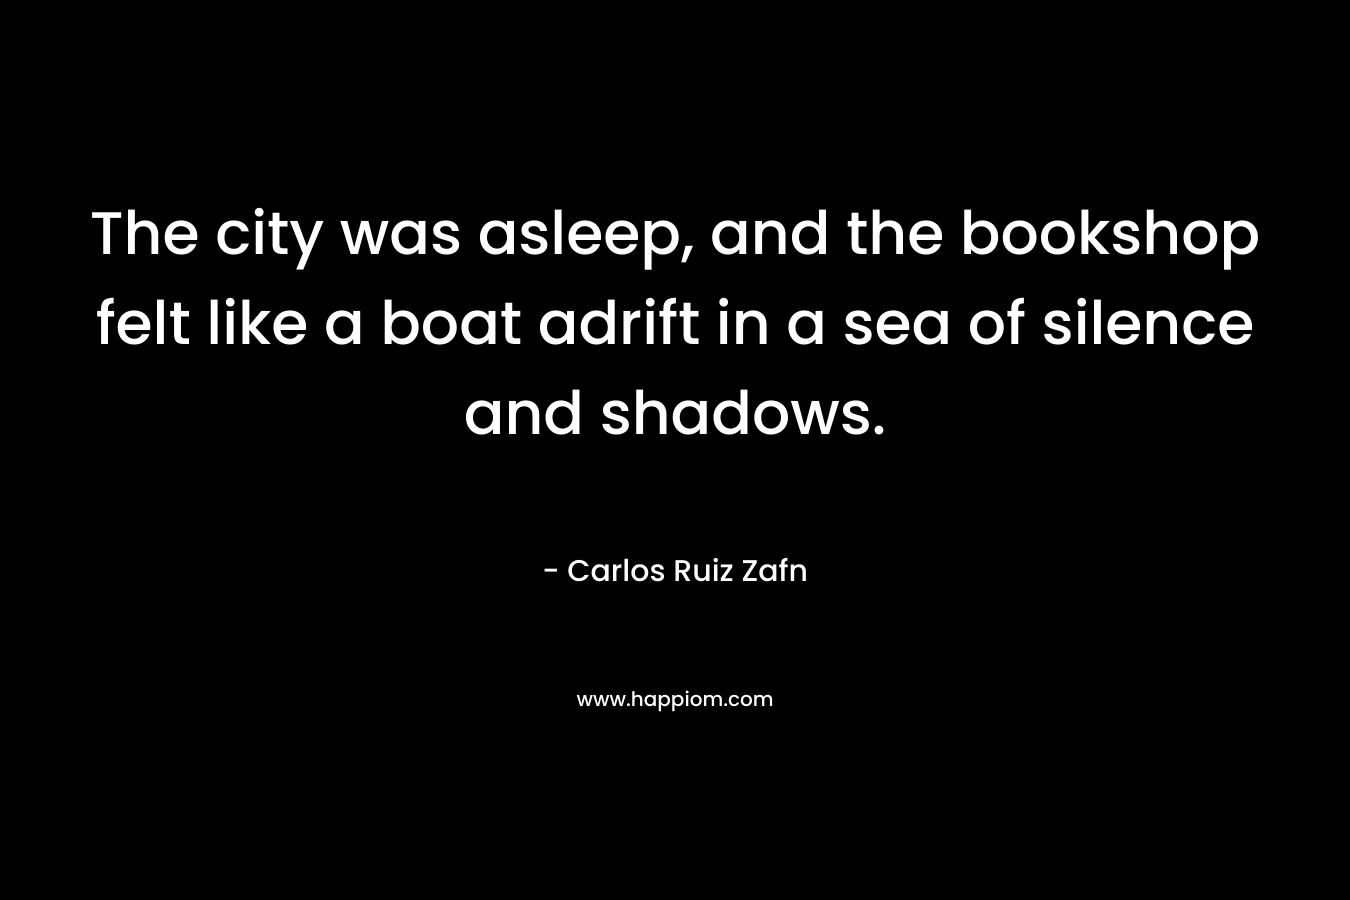 The city was asleep, and the bookshop felt like a boat adrift in a sea of silence and shadows.